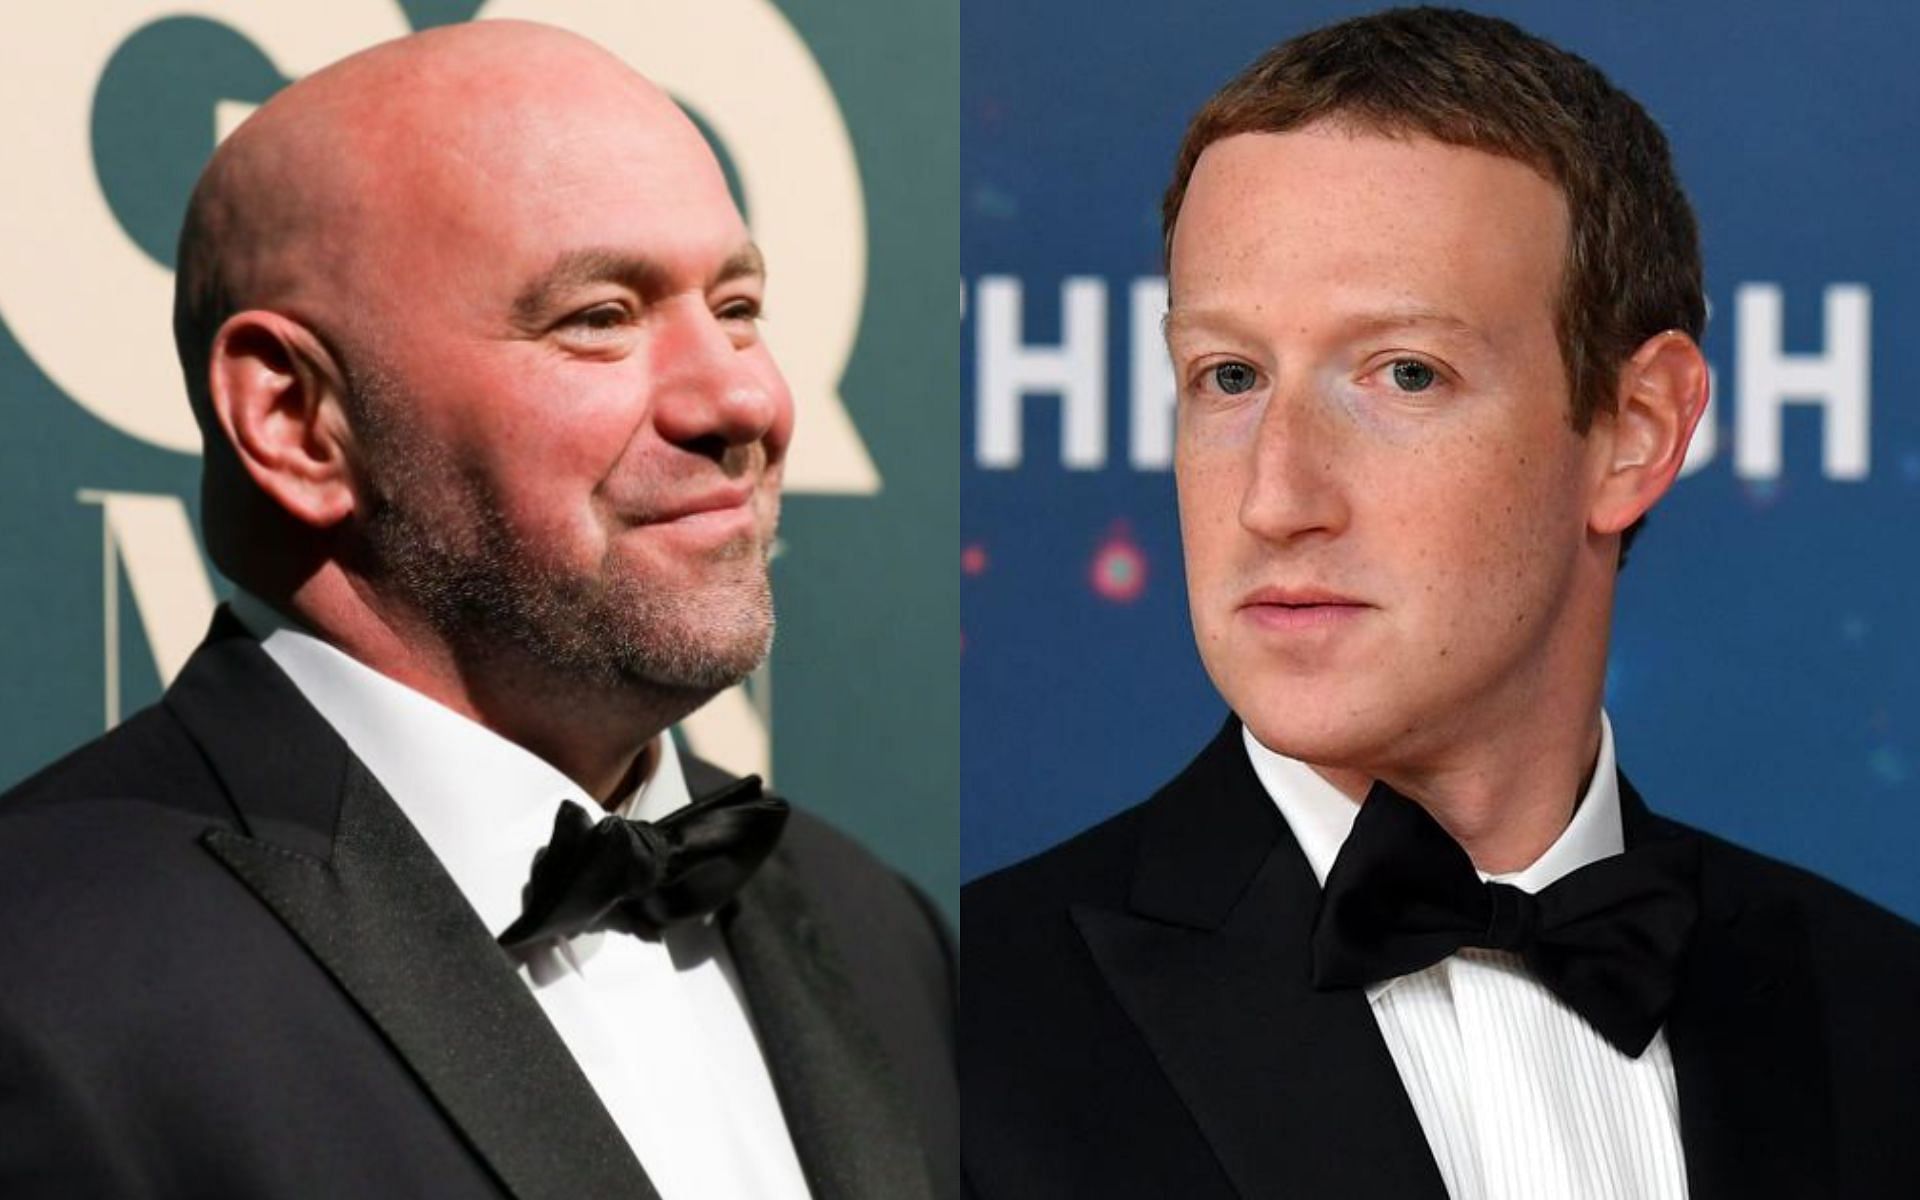 Dana White (left) and Mark Zuckerberg (right). [Images courtesy: left image from Getty Images and right image from AFP]